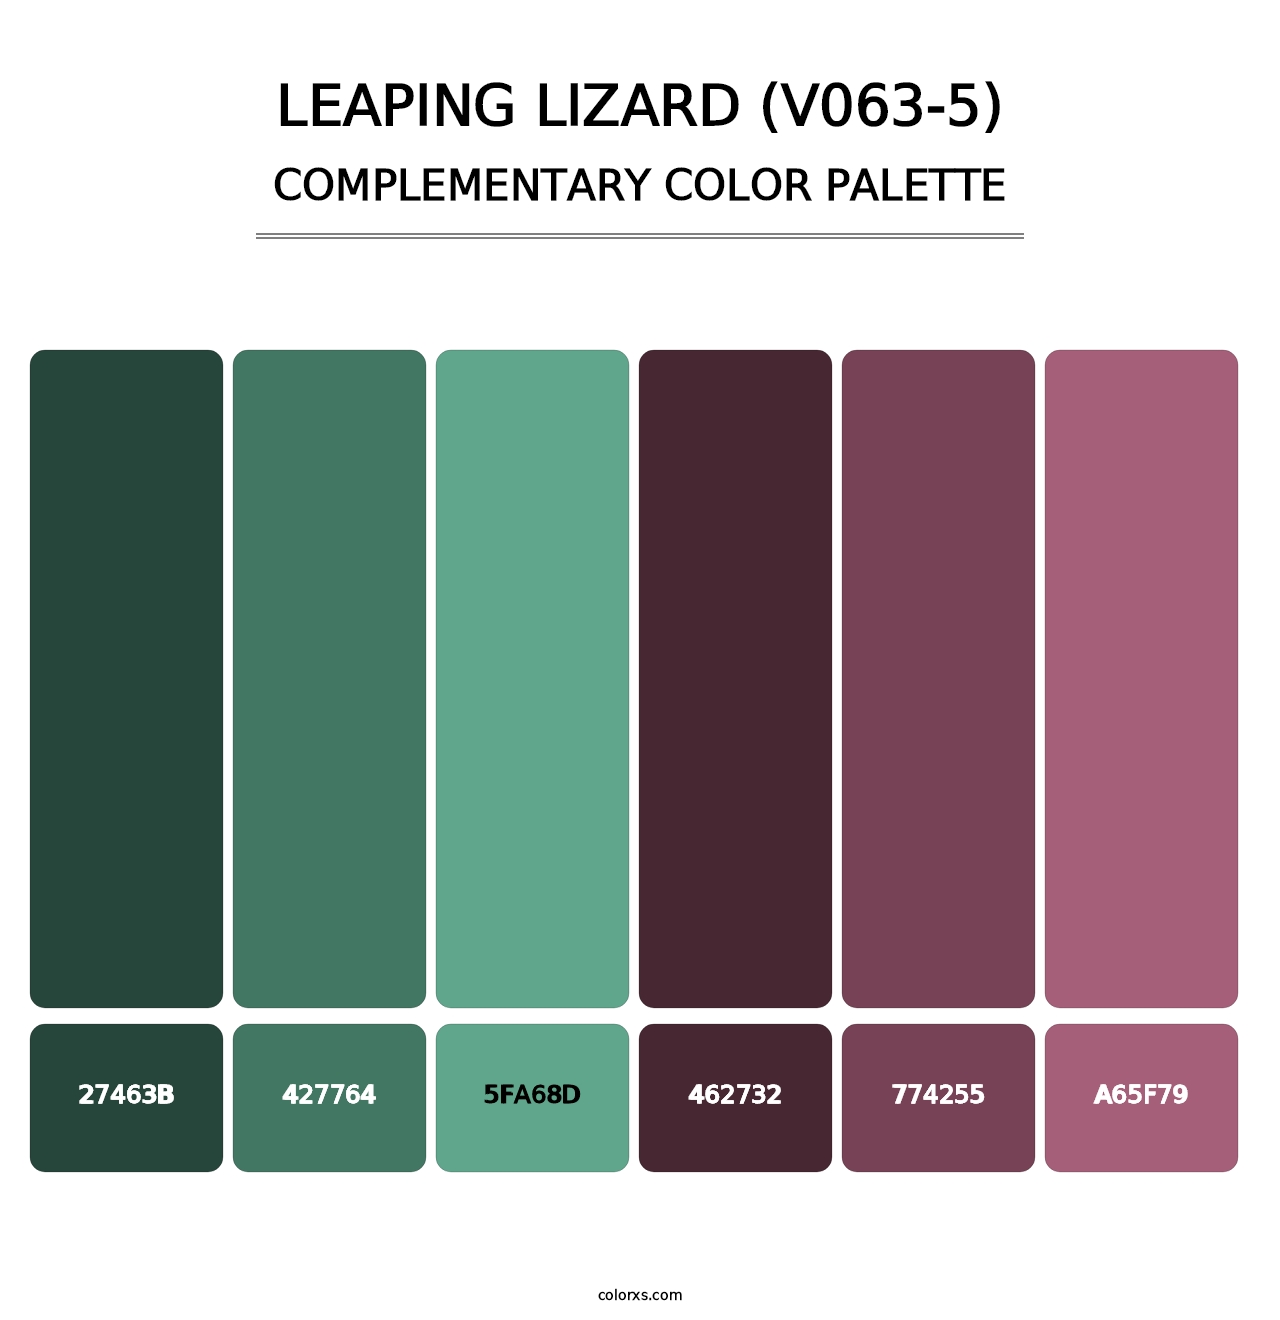 Leaping Lizard (V063-5) - Complementary Color Palette